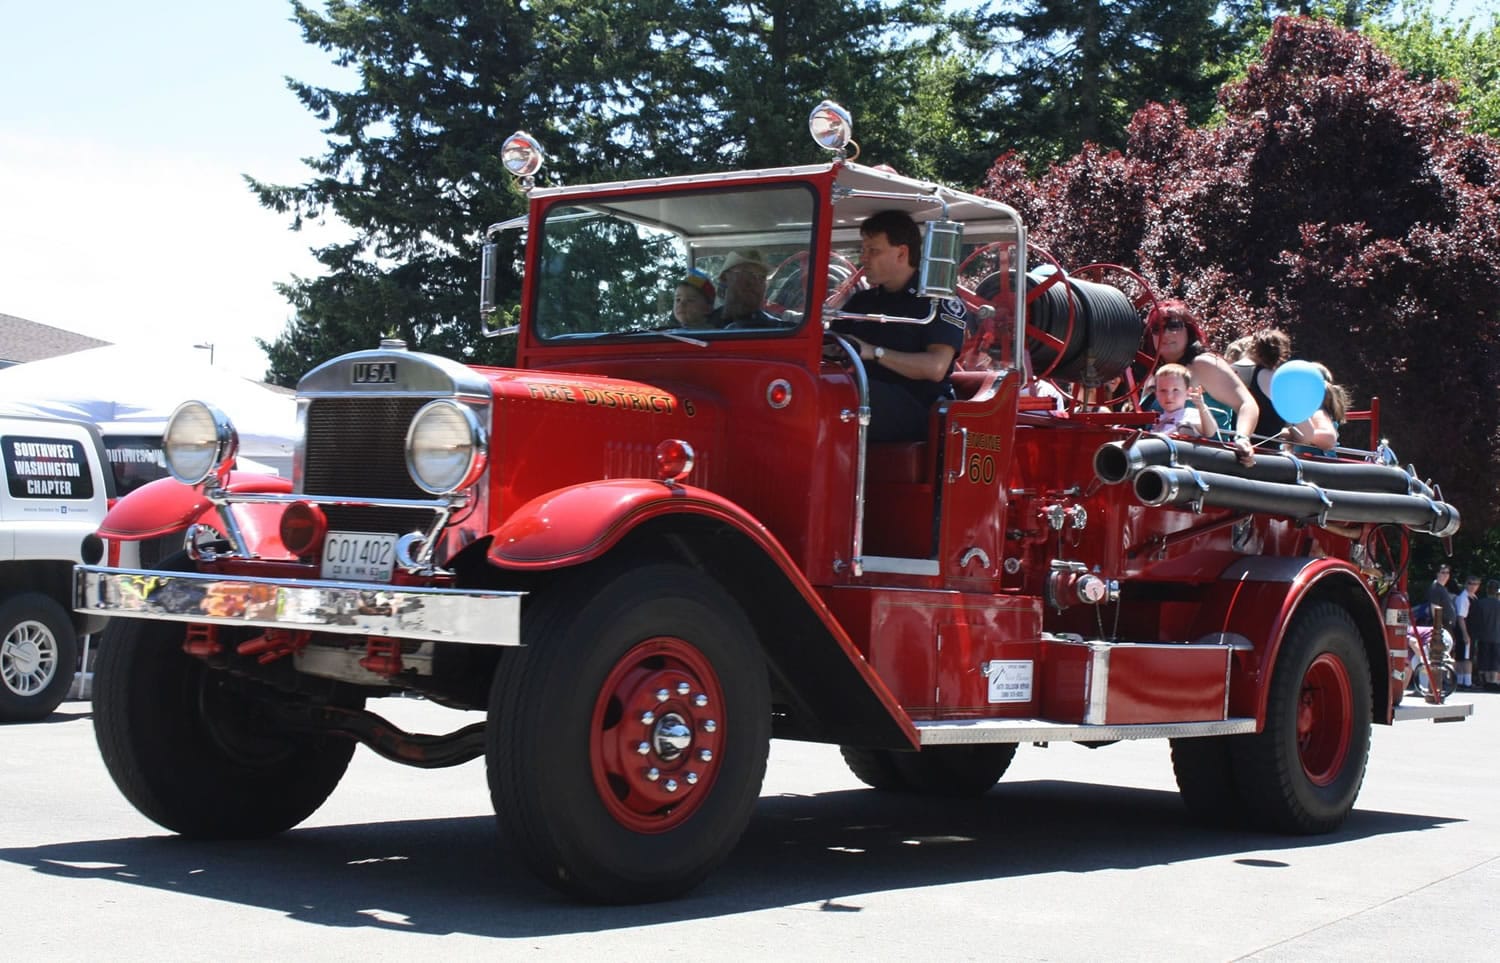 Firefighters from Fire District 6 gave rides in a 1940-model Holabird engine, which Dick Streissguth said was built by the U.S Army Corps of Engineers.